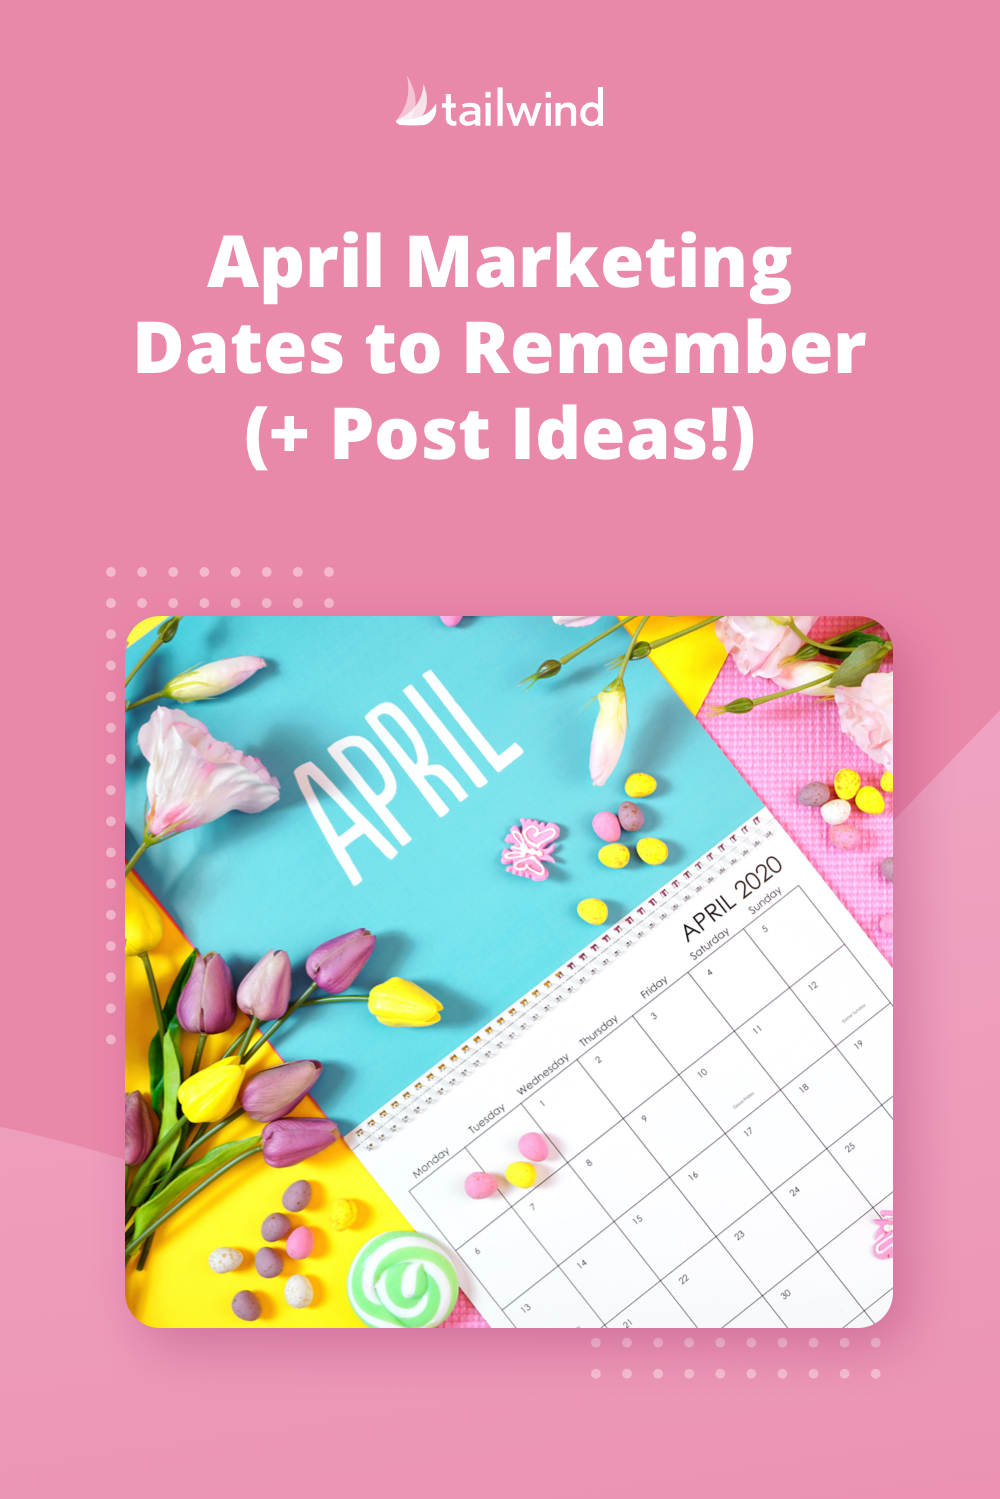 April Marketing Dates to Remember (+ Post Ideas!)